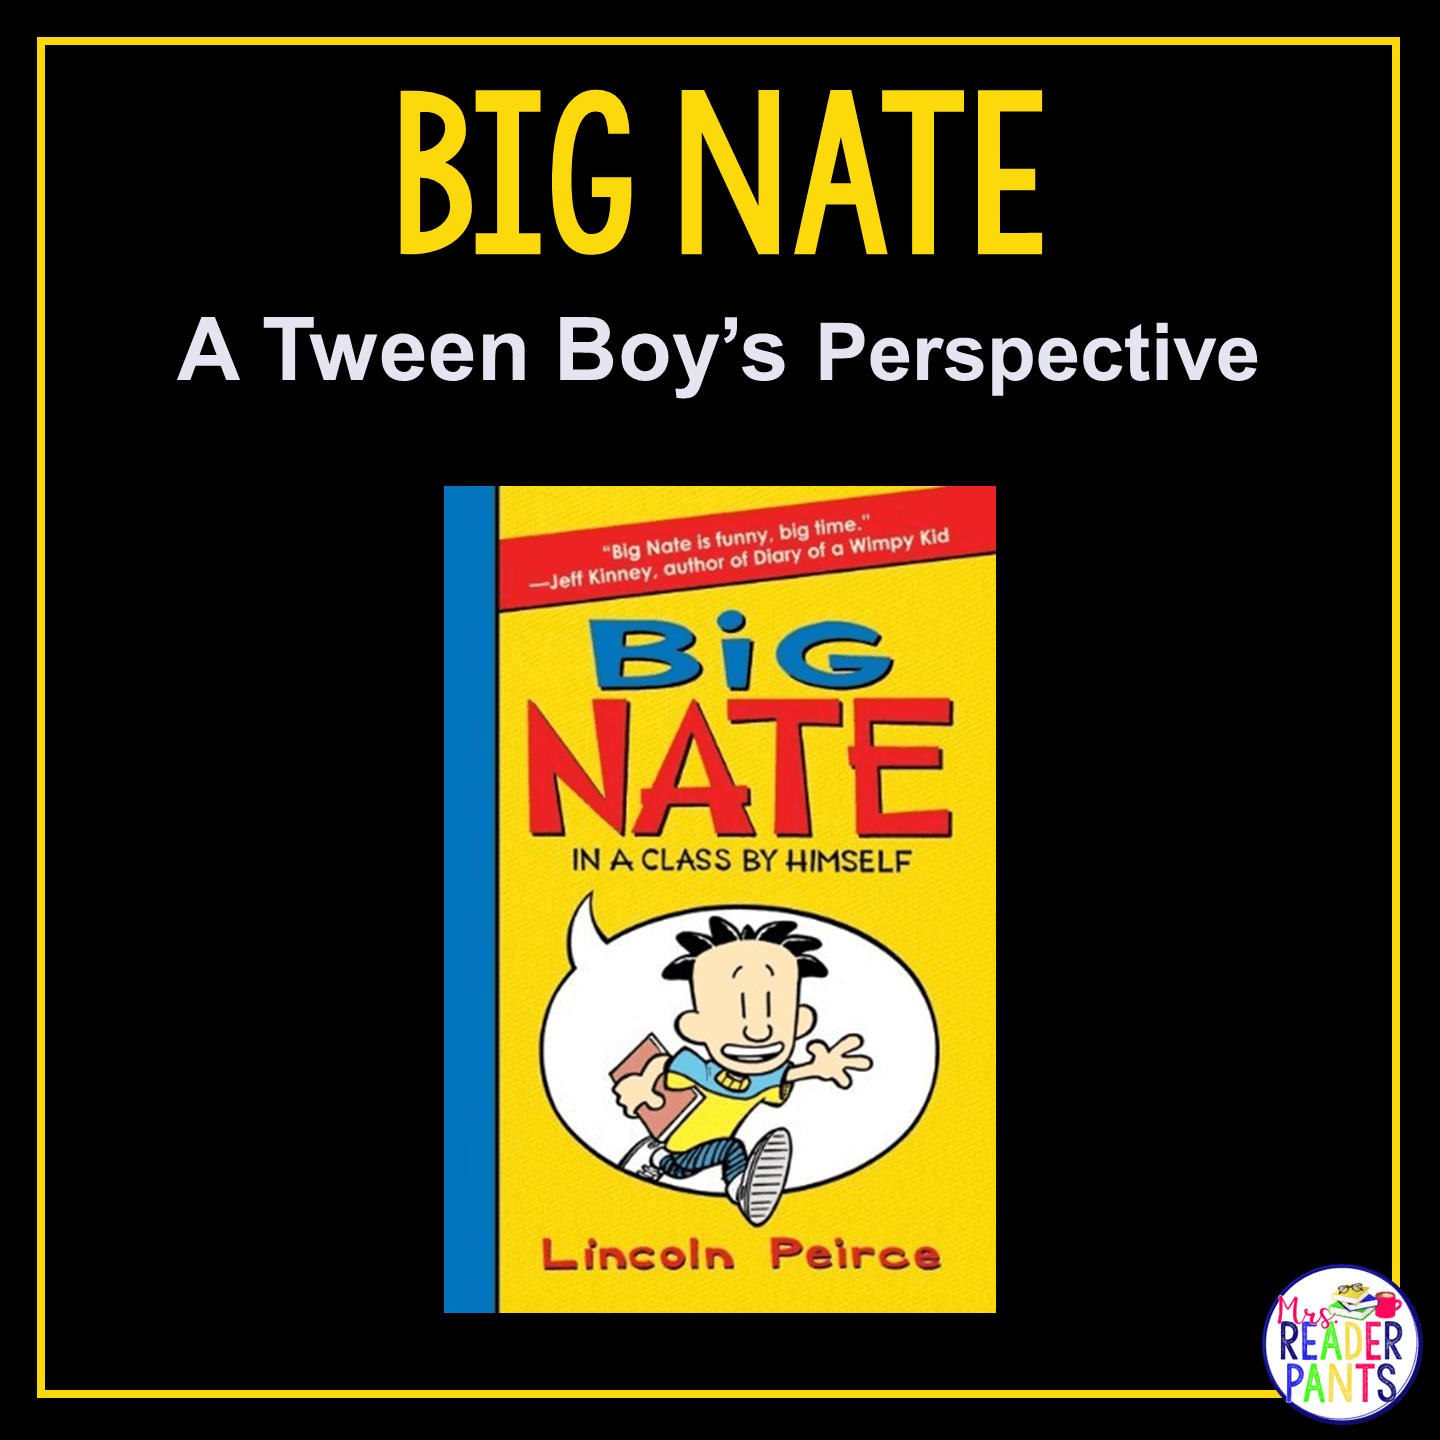 This is an 11-year old boy's review of Big Nate by Lincoln Peirce (book #1 in the series).